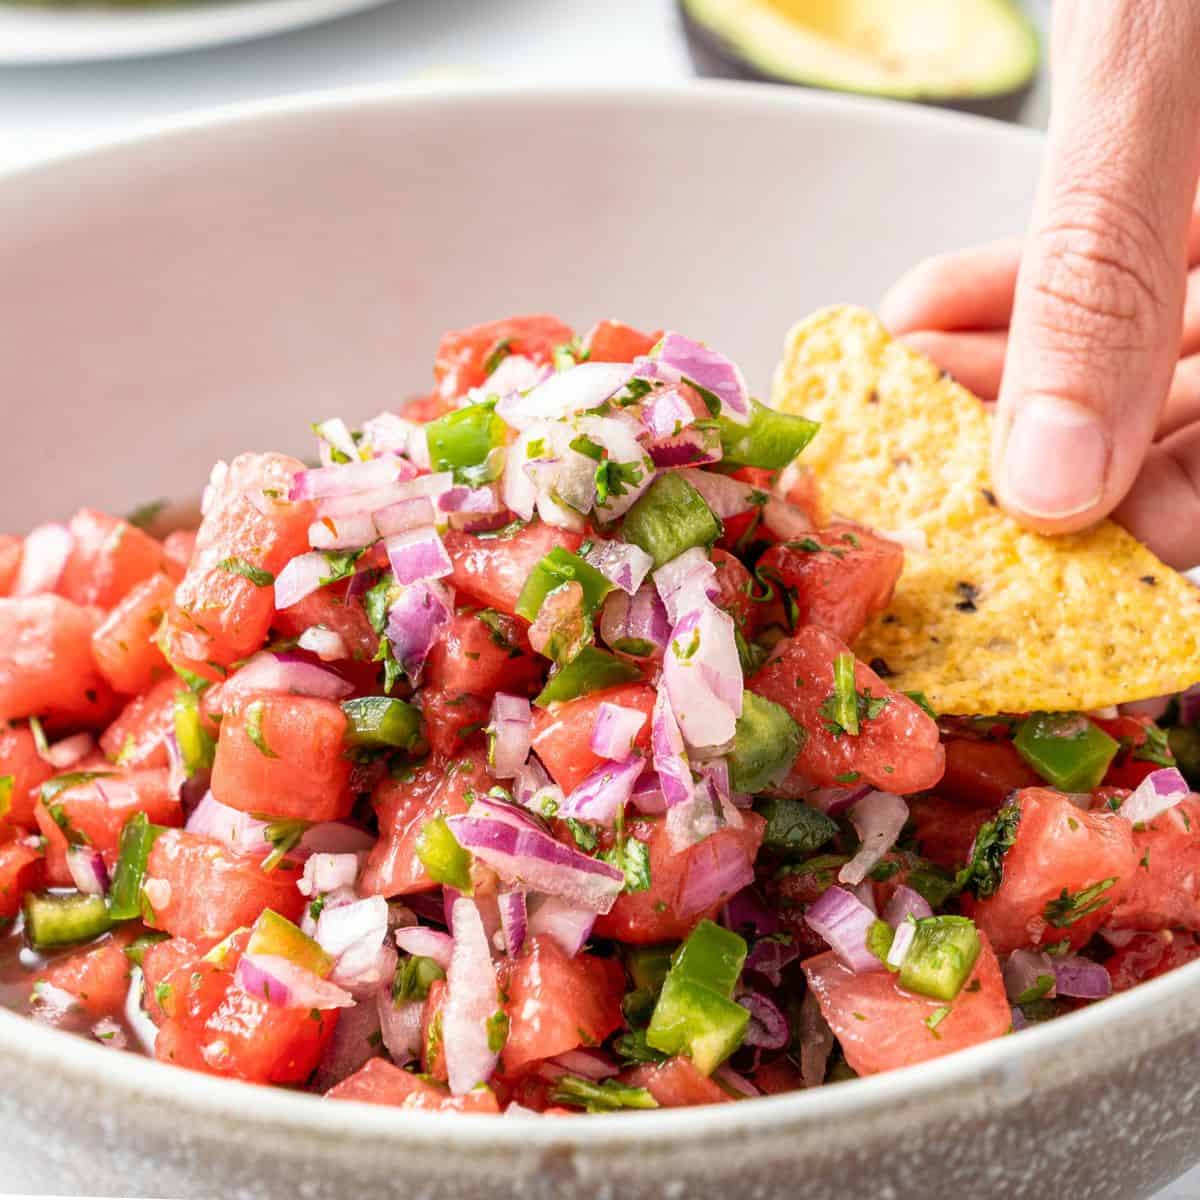 Sweet and Spicy Watermelon Salsa, a simple and delicious recipe made with fresh watermelon and with a hint of jalapeno.